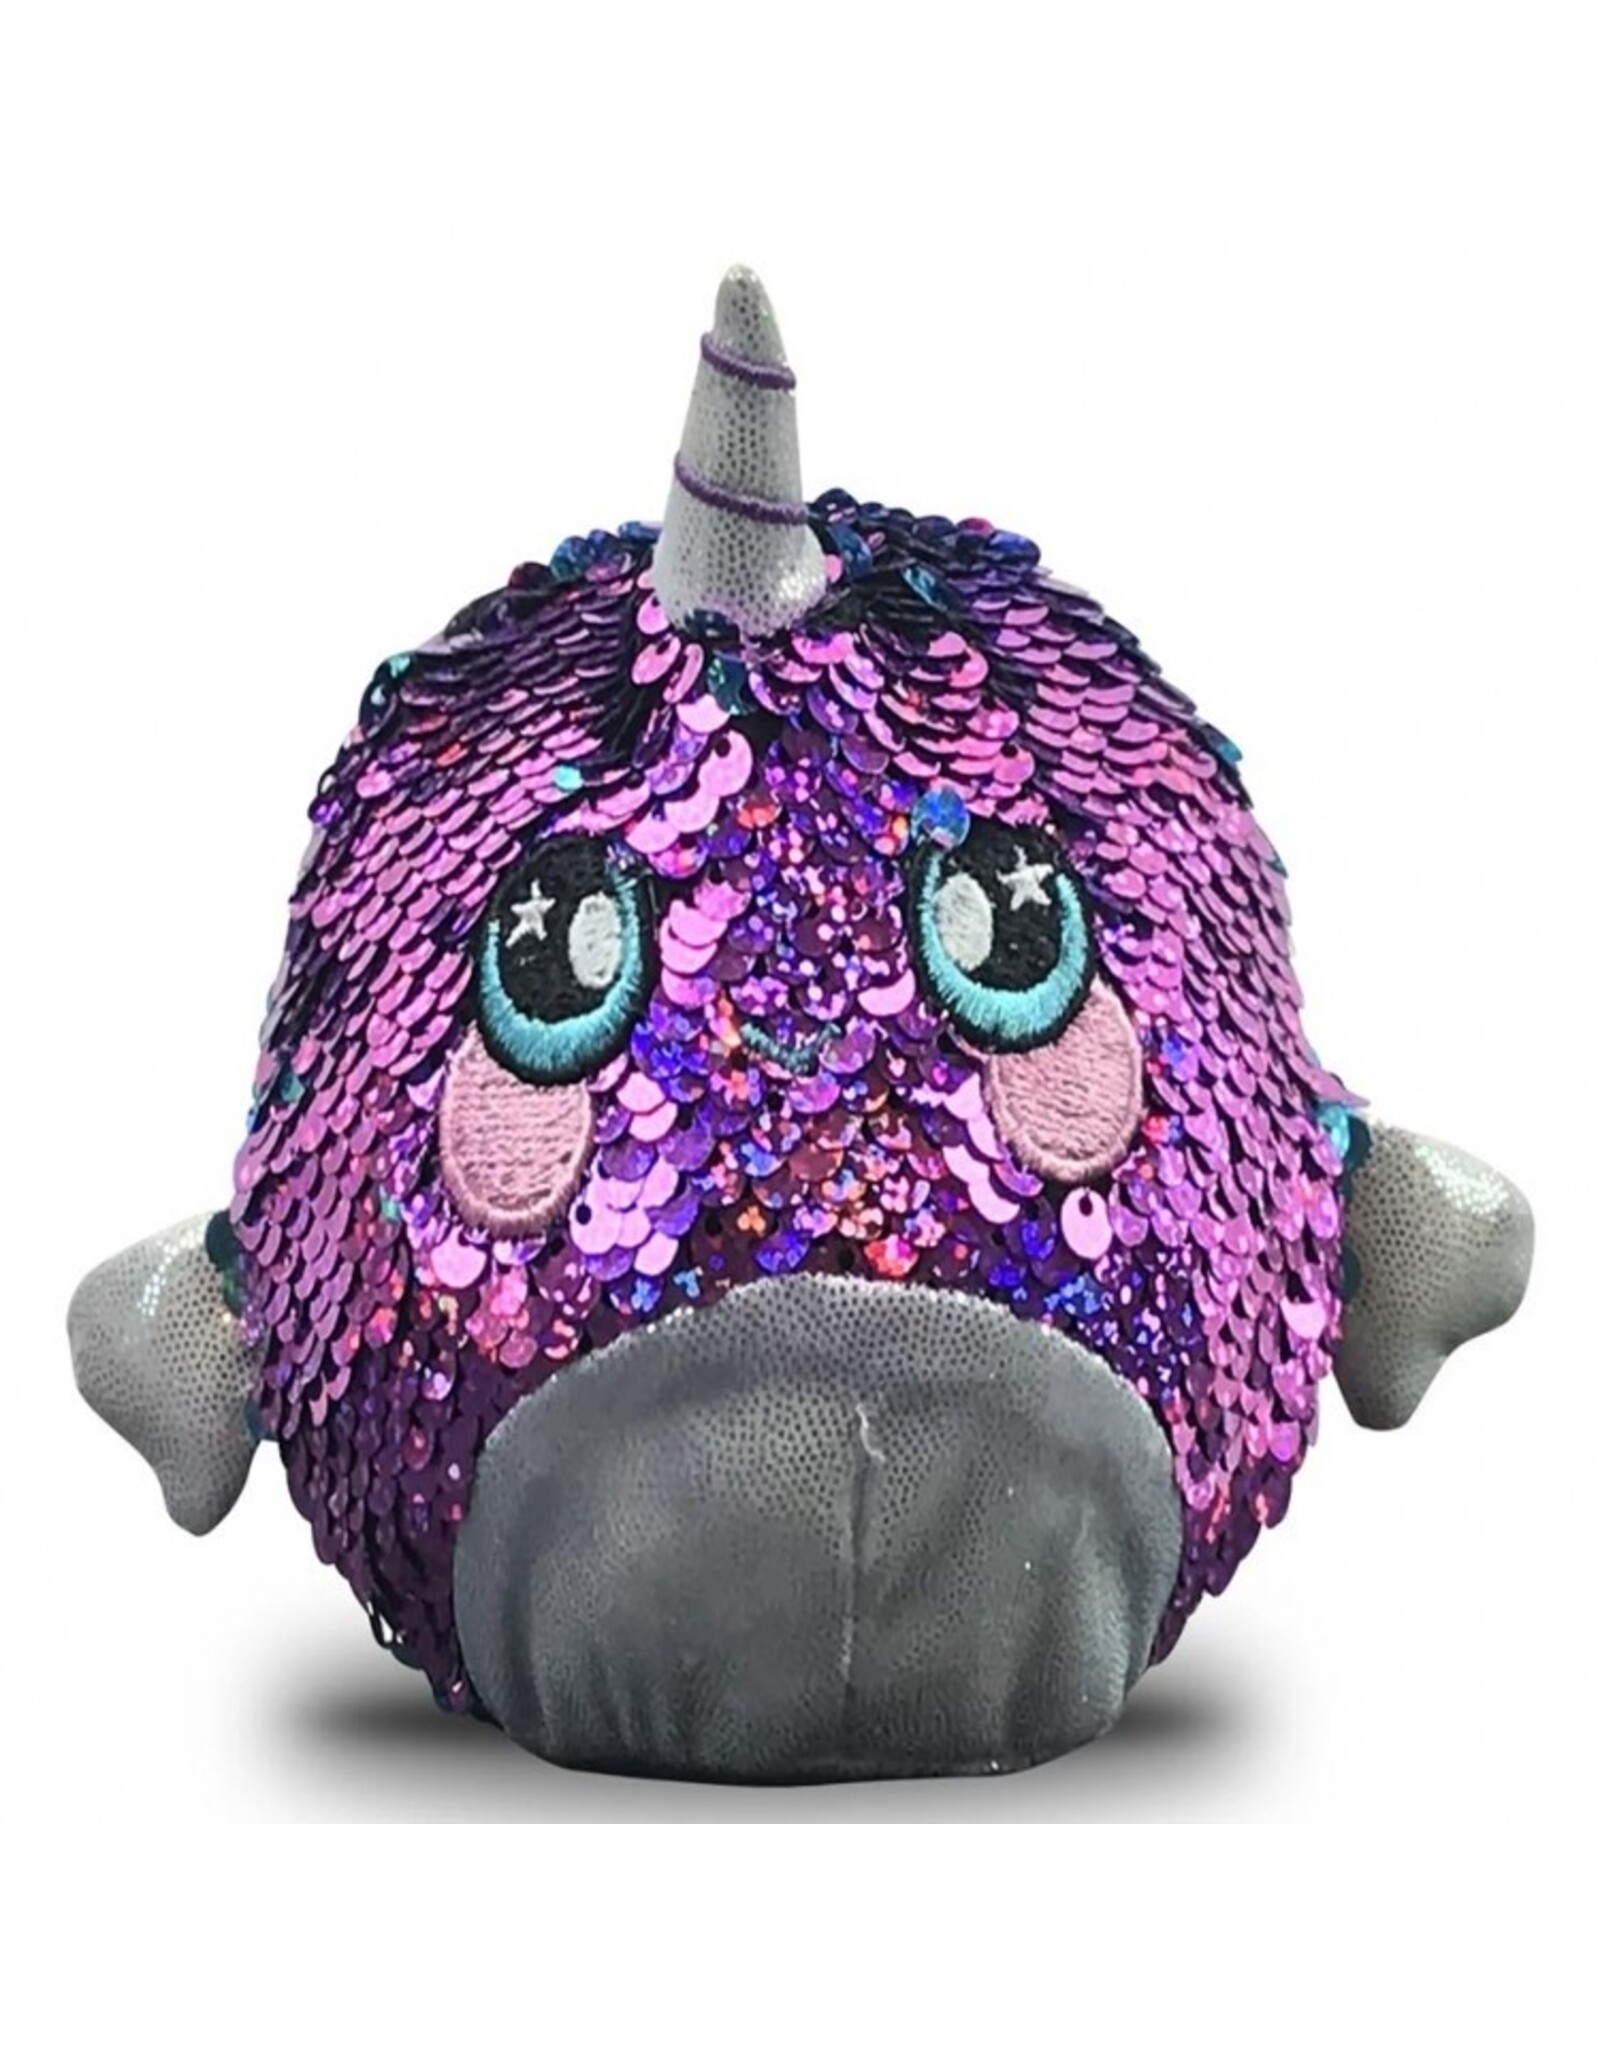 Plush: Sq: Shelby Sparkle Narwhal